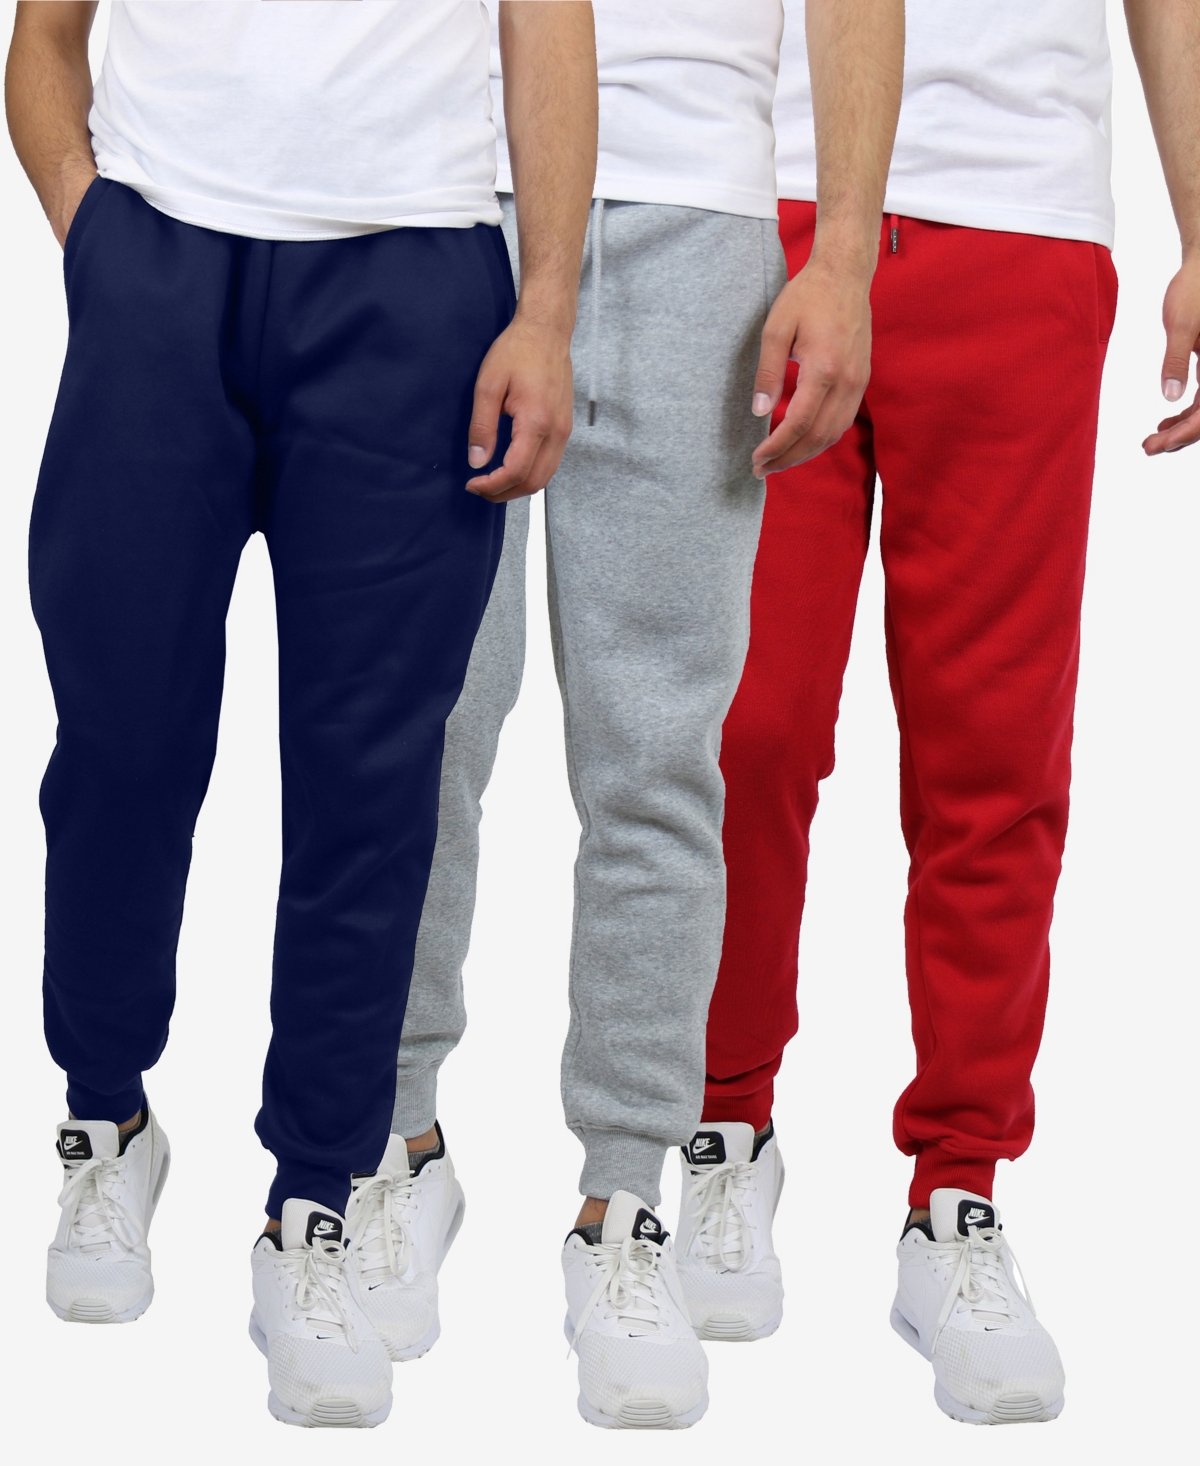 Galaxy By Harvic Men's Slim Fit Heavyweight Classic Fleece Jogger Sweatpants, Pack Of 3 In Navy,heather Gray,red